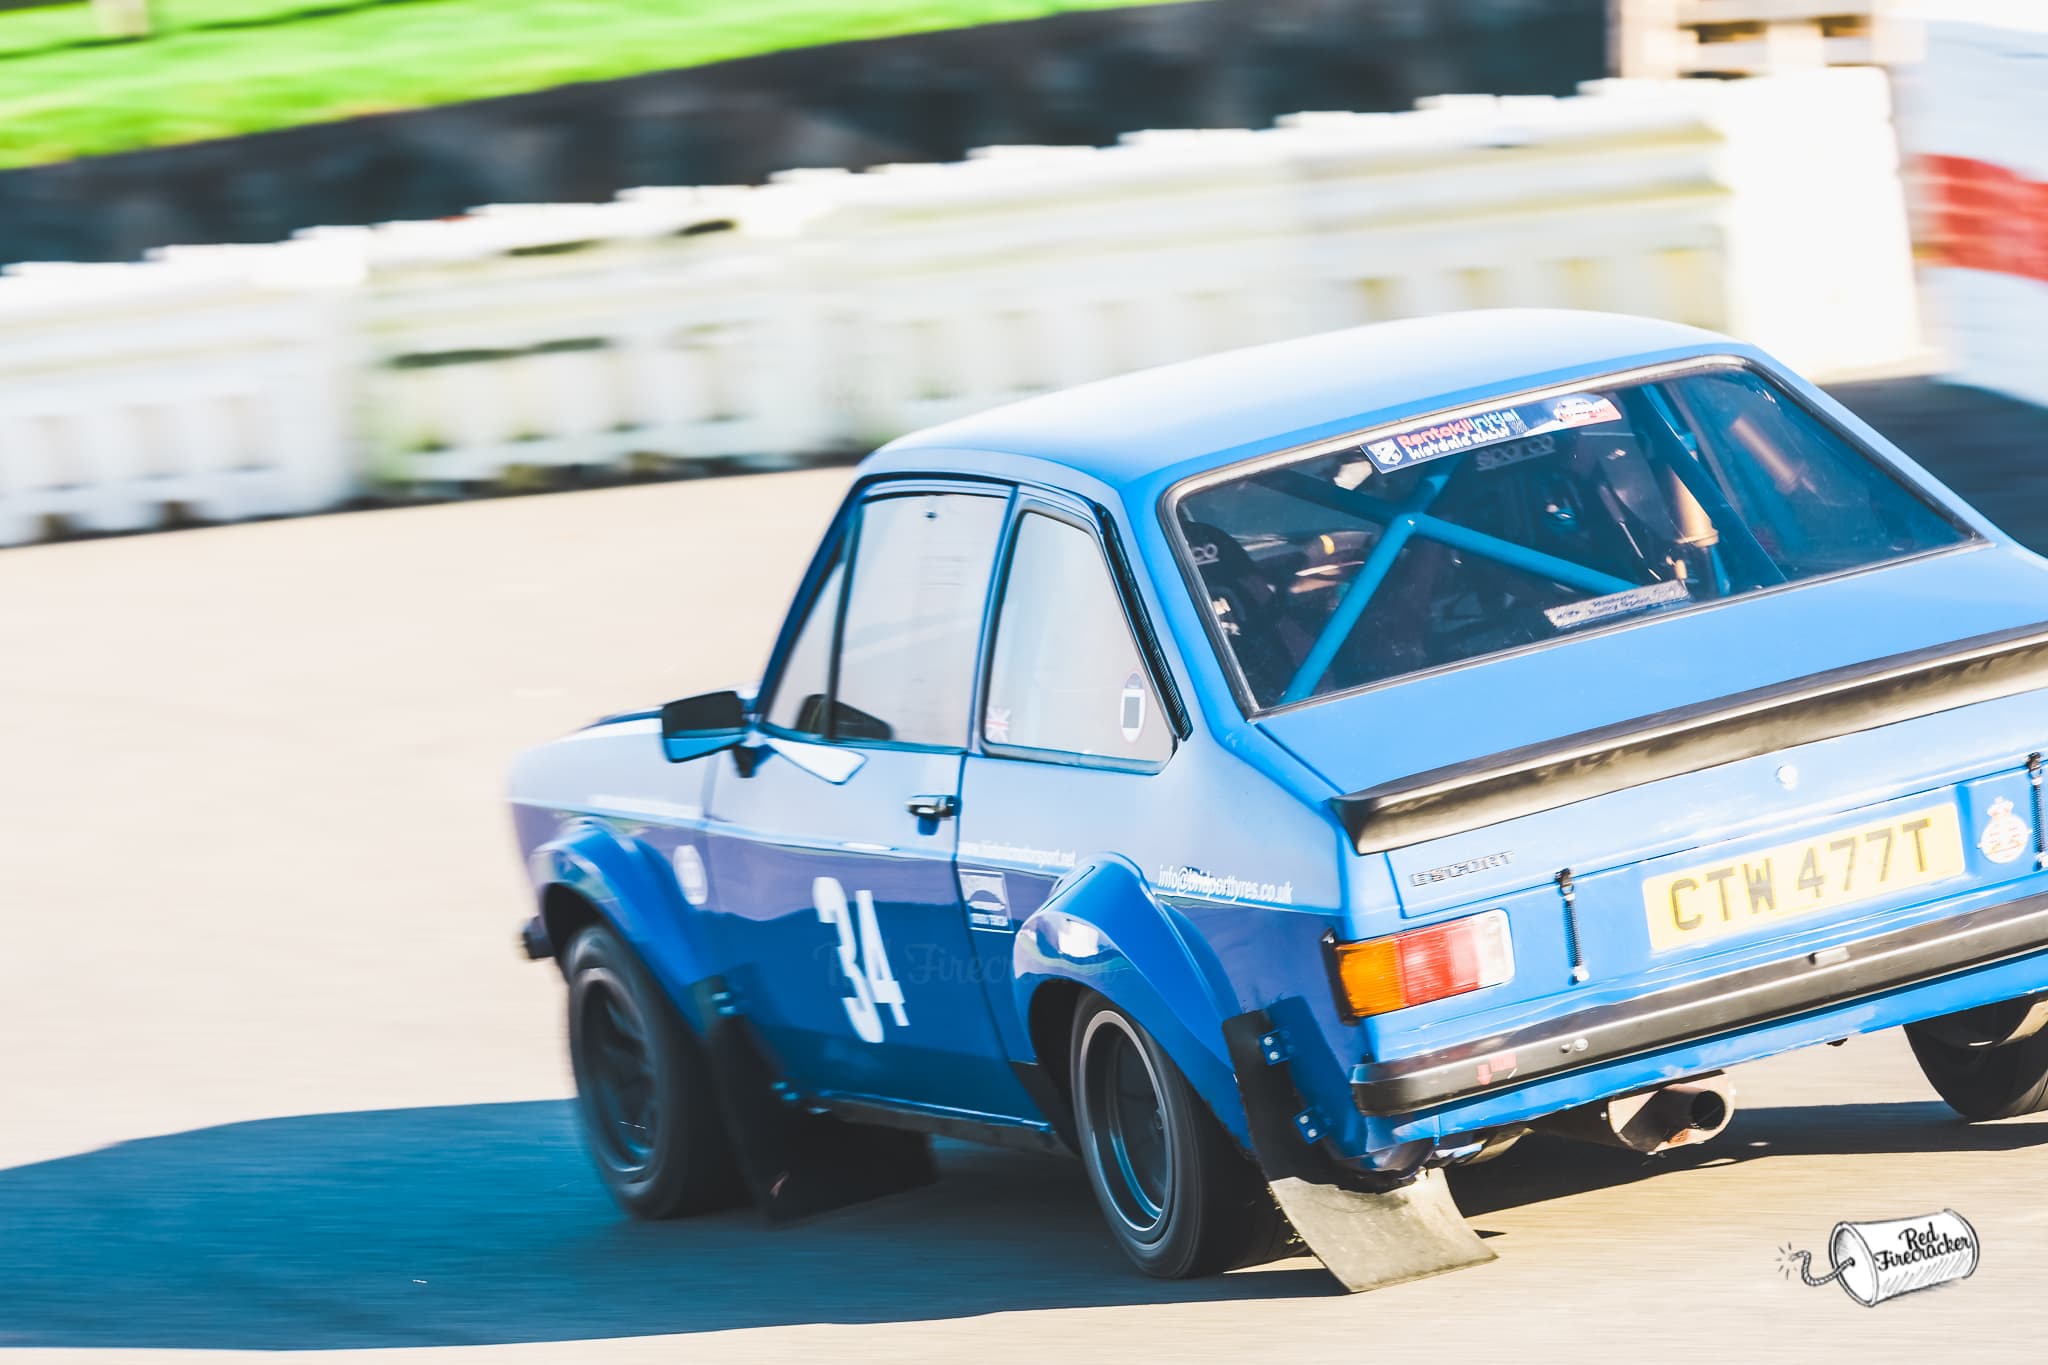 South Downs Stages, Goodwood Motor Circuit, 2nd Decembr 2023